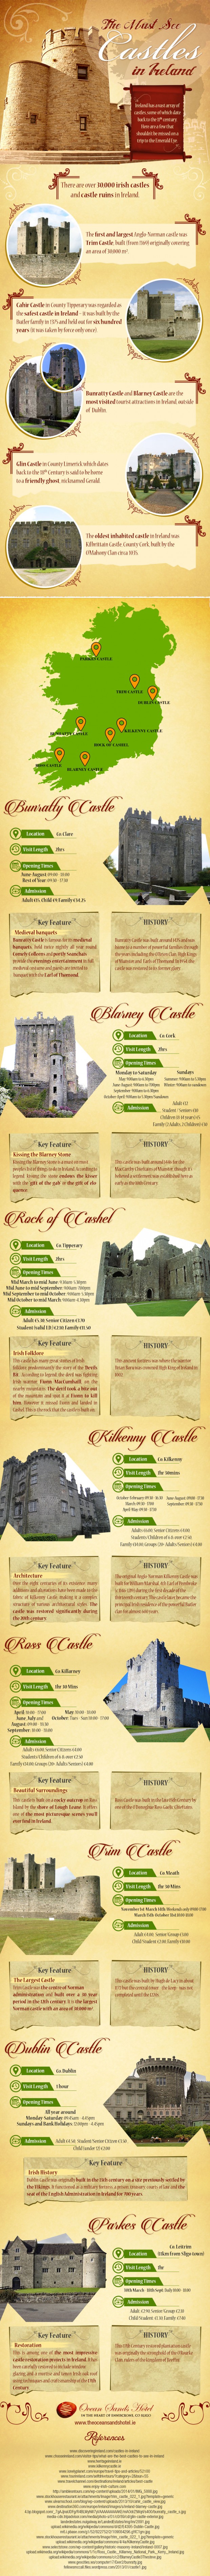 The Must See Castles In Ireland IG